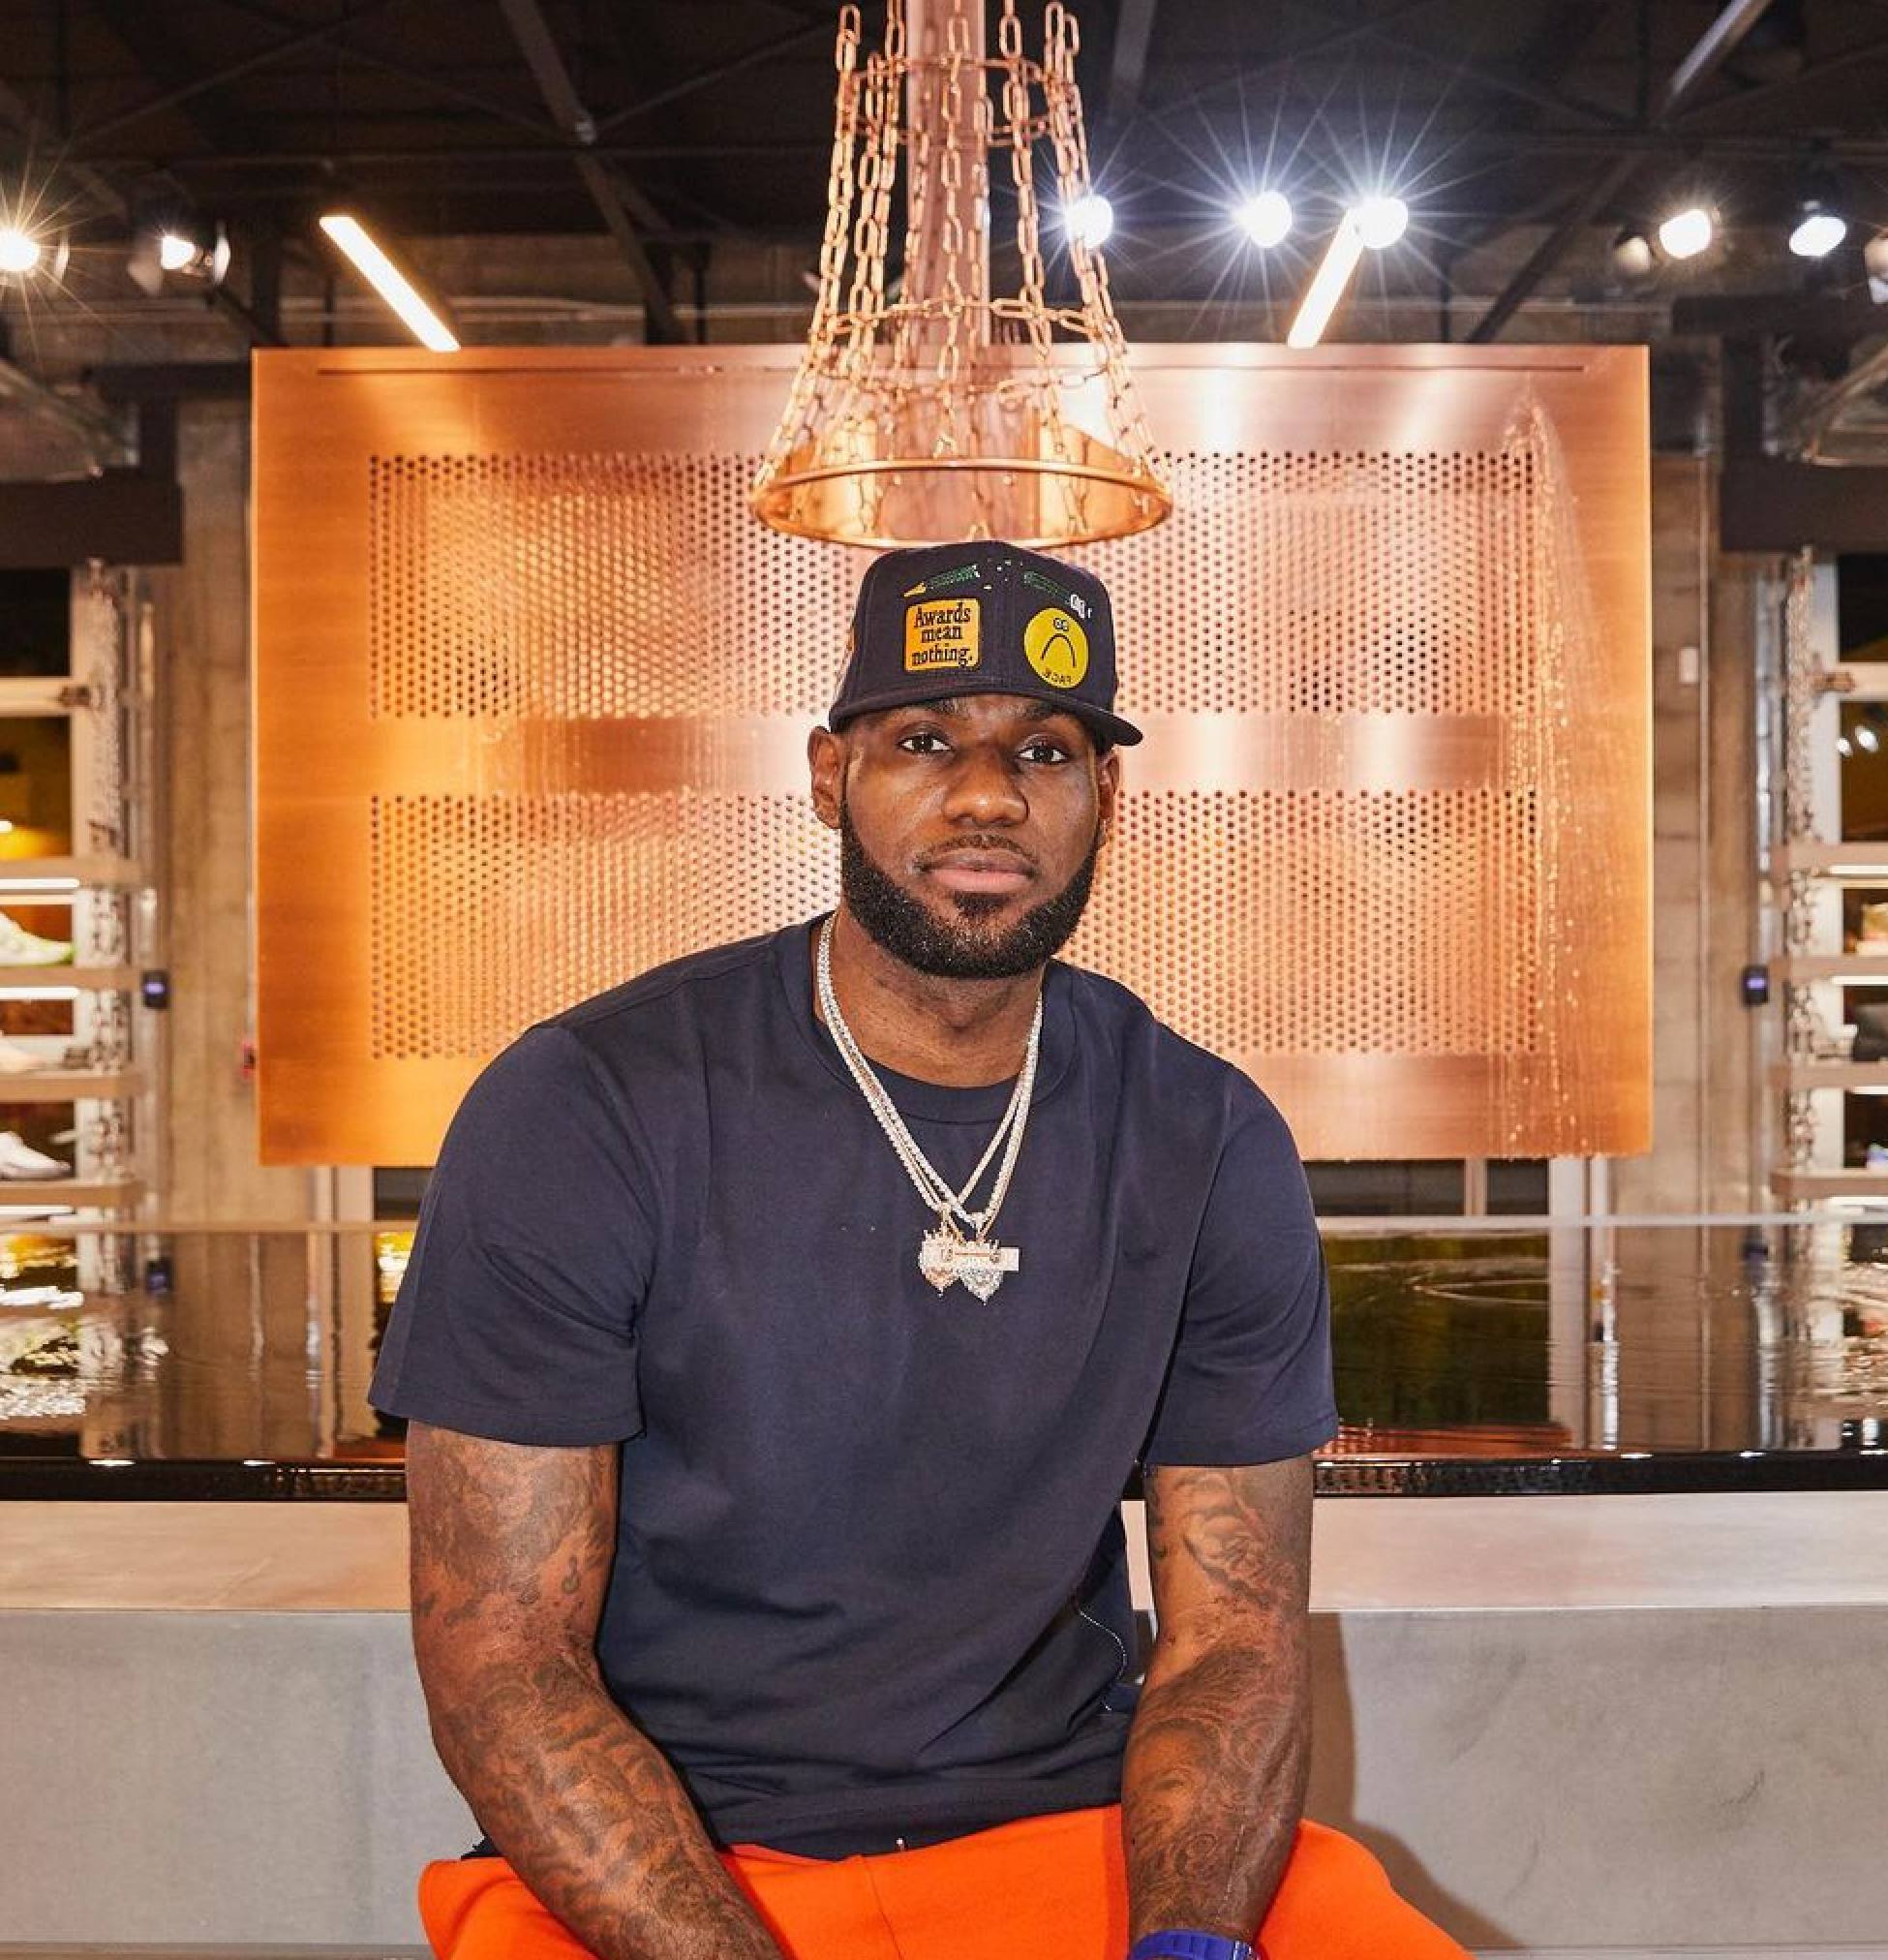 LeBron James becomes second athlete to be worth $1billion thanks